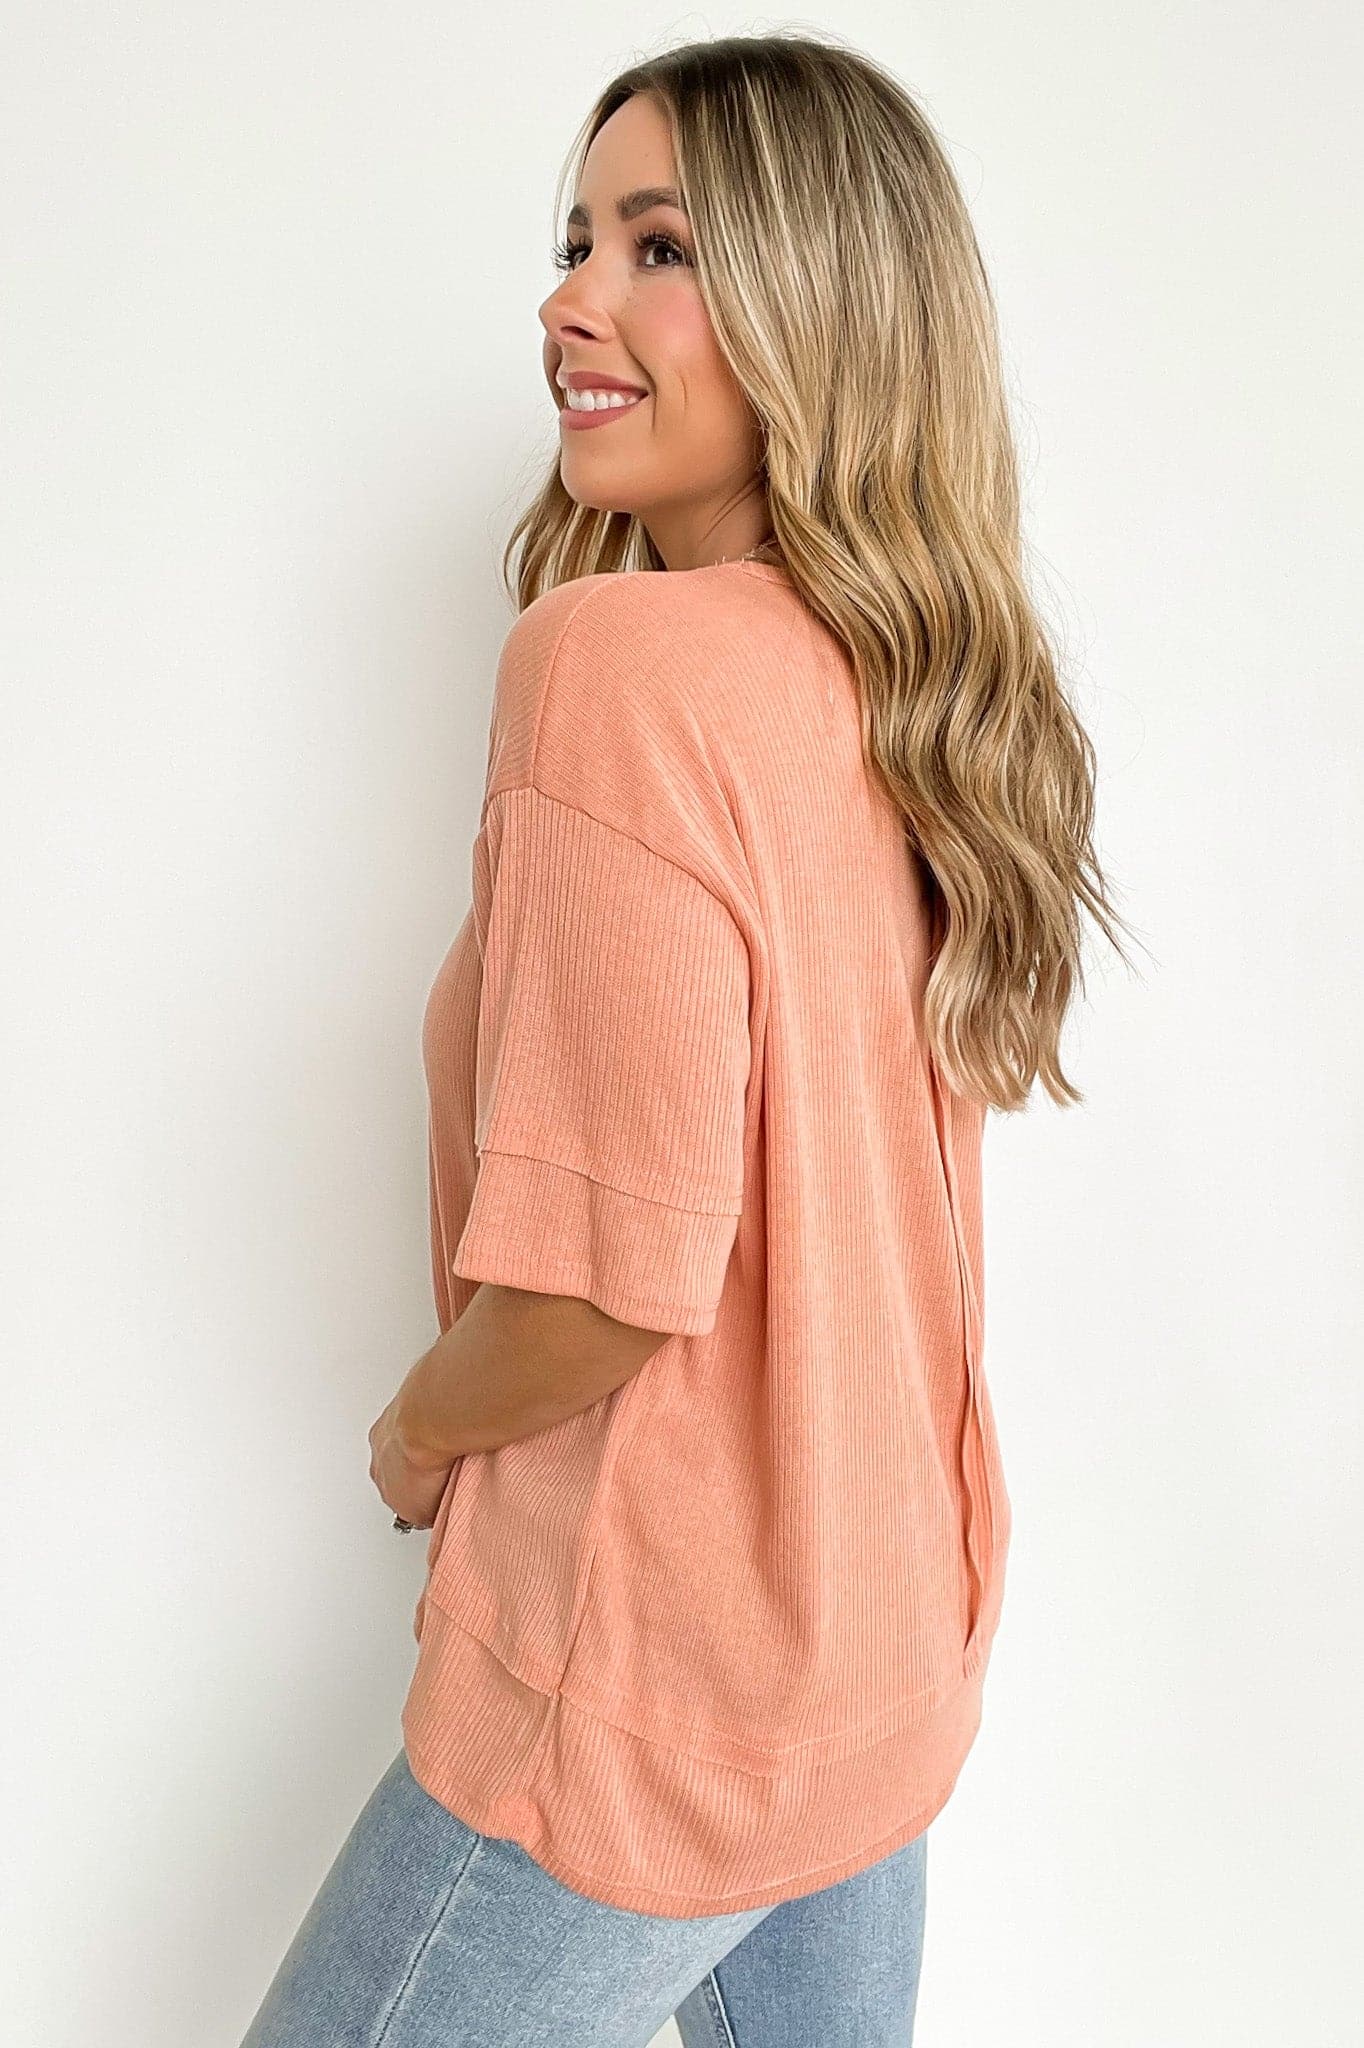  Big Time Crush Thermal Knit Short Sleeve Top | CURVE - FINAL SALE - Madison and Mallory